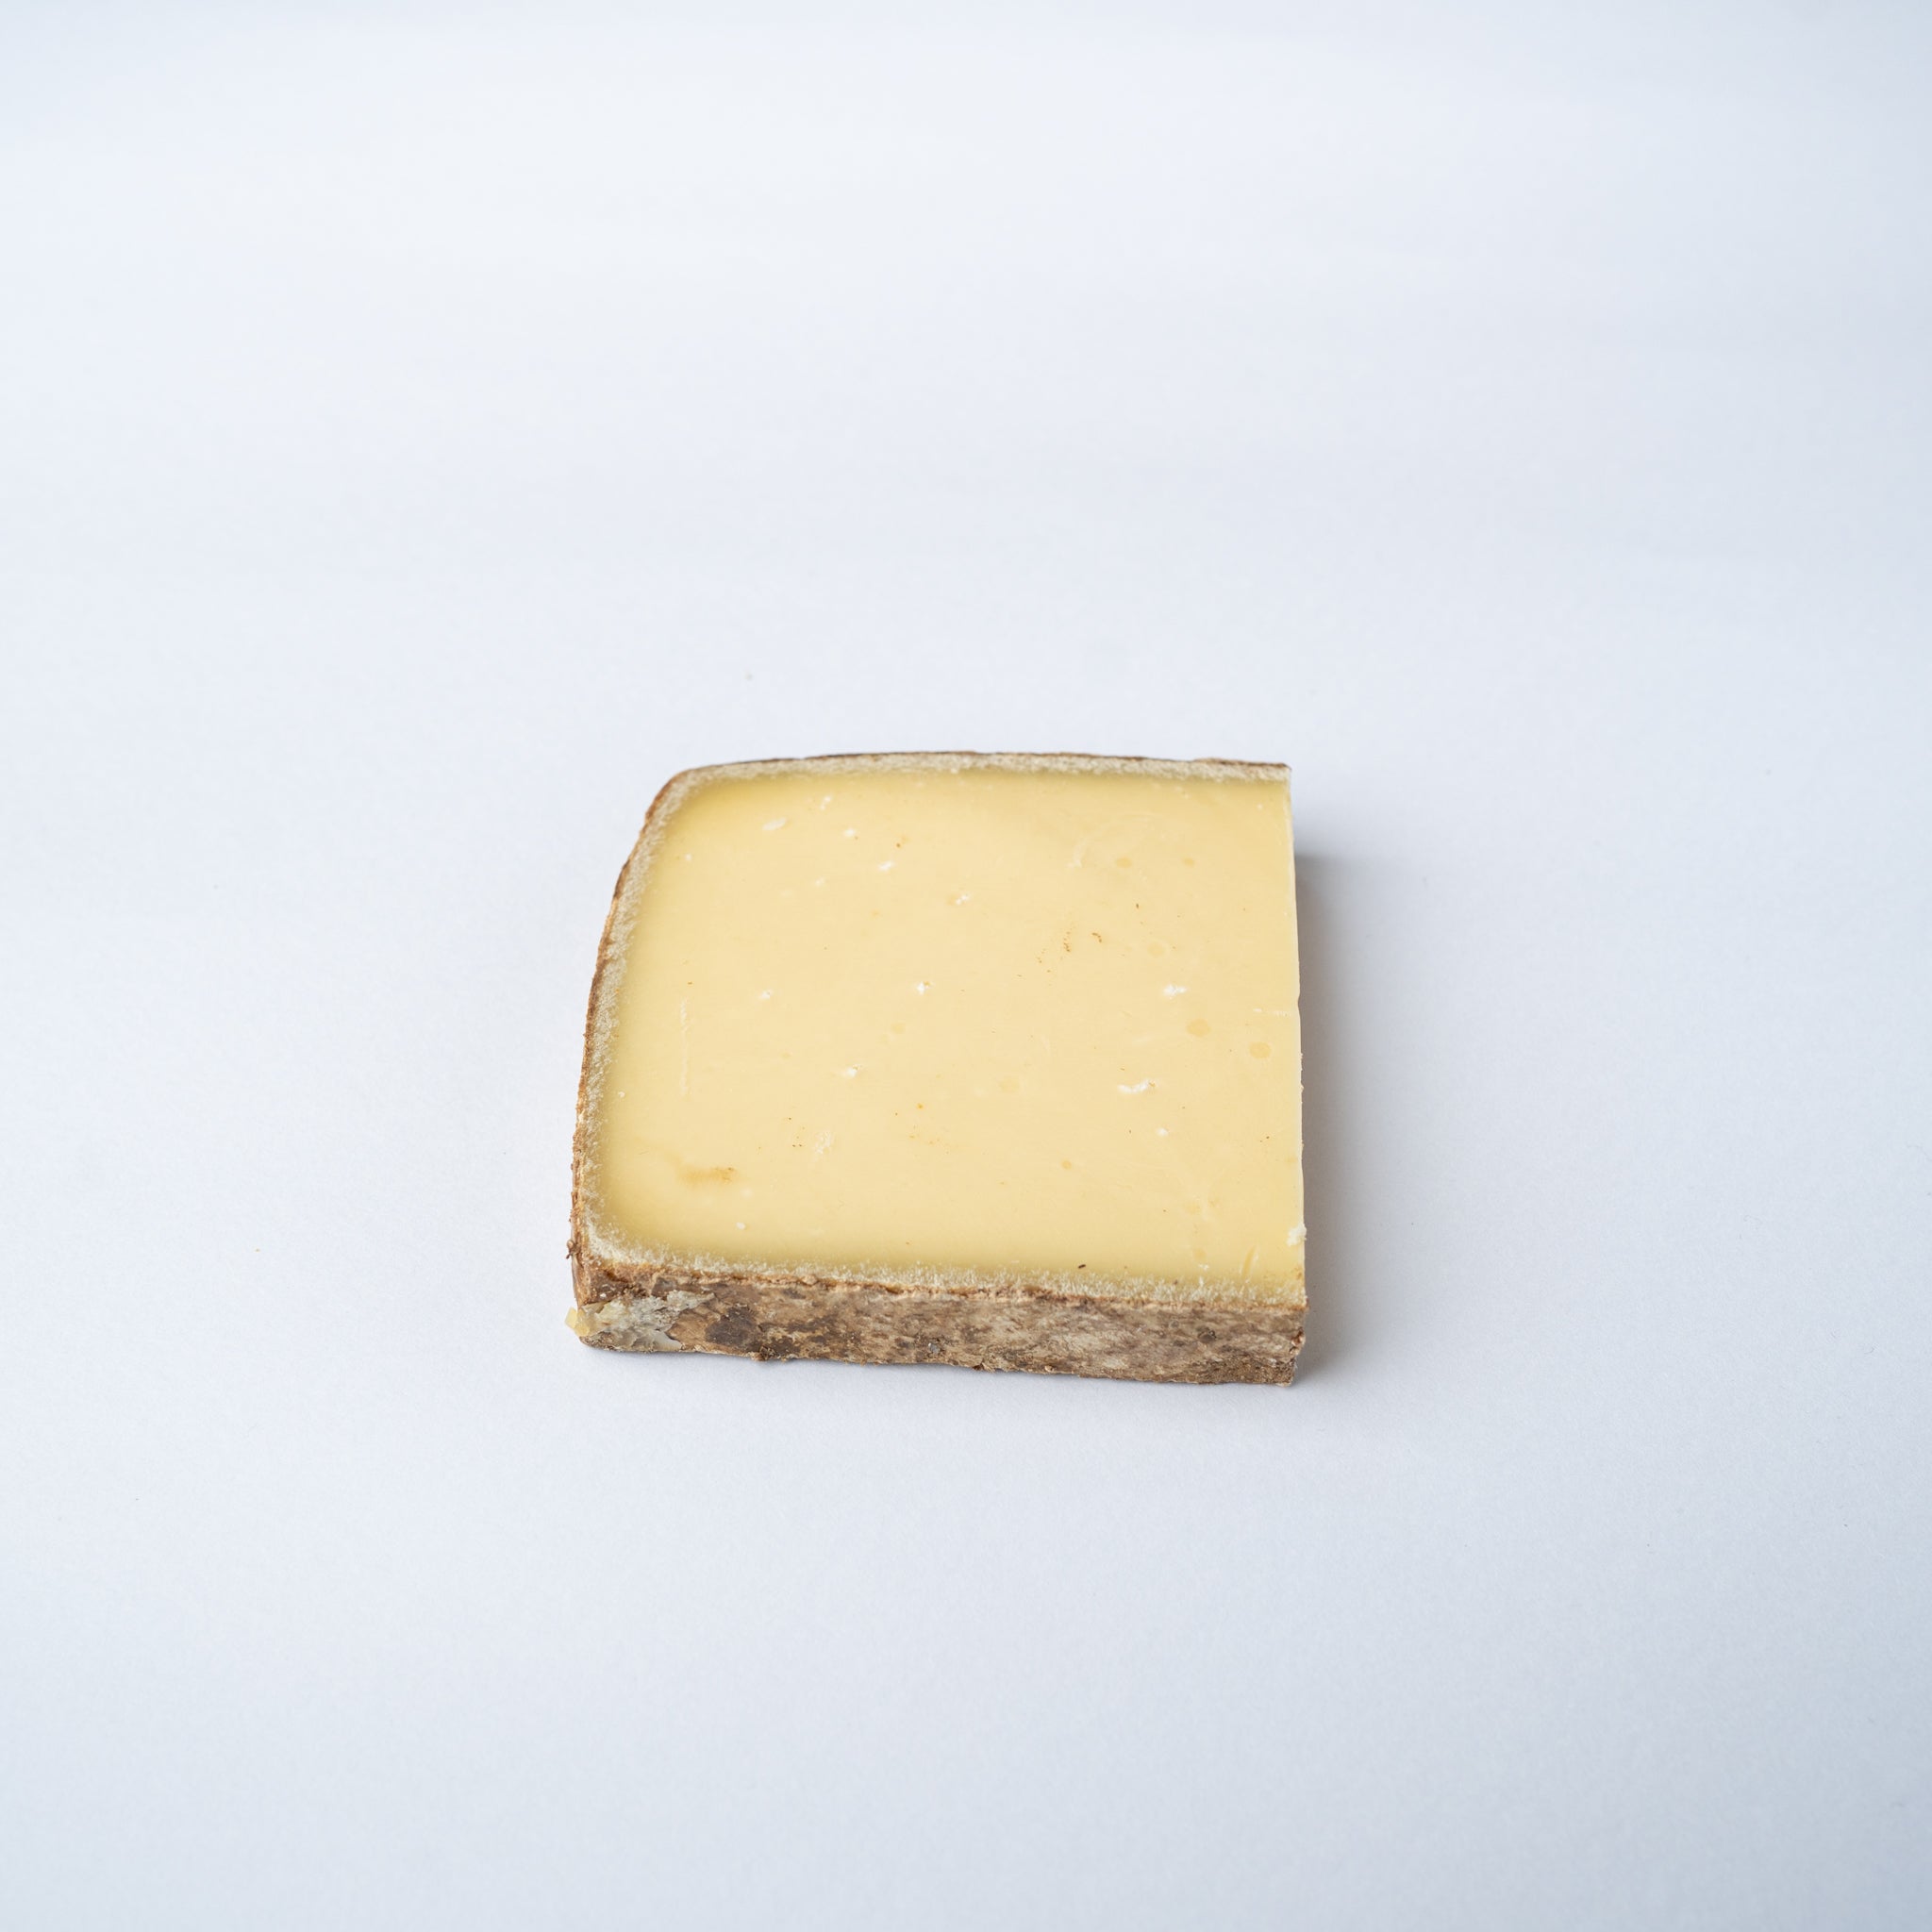 A 200g wedge of L'Etivaz cheese.